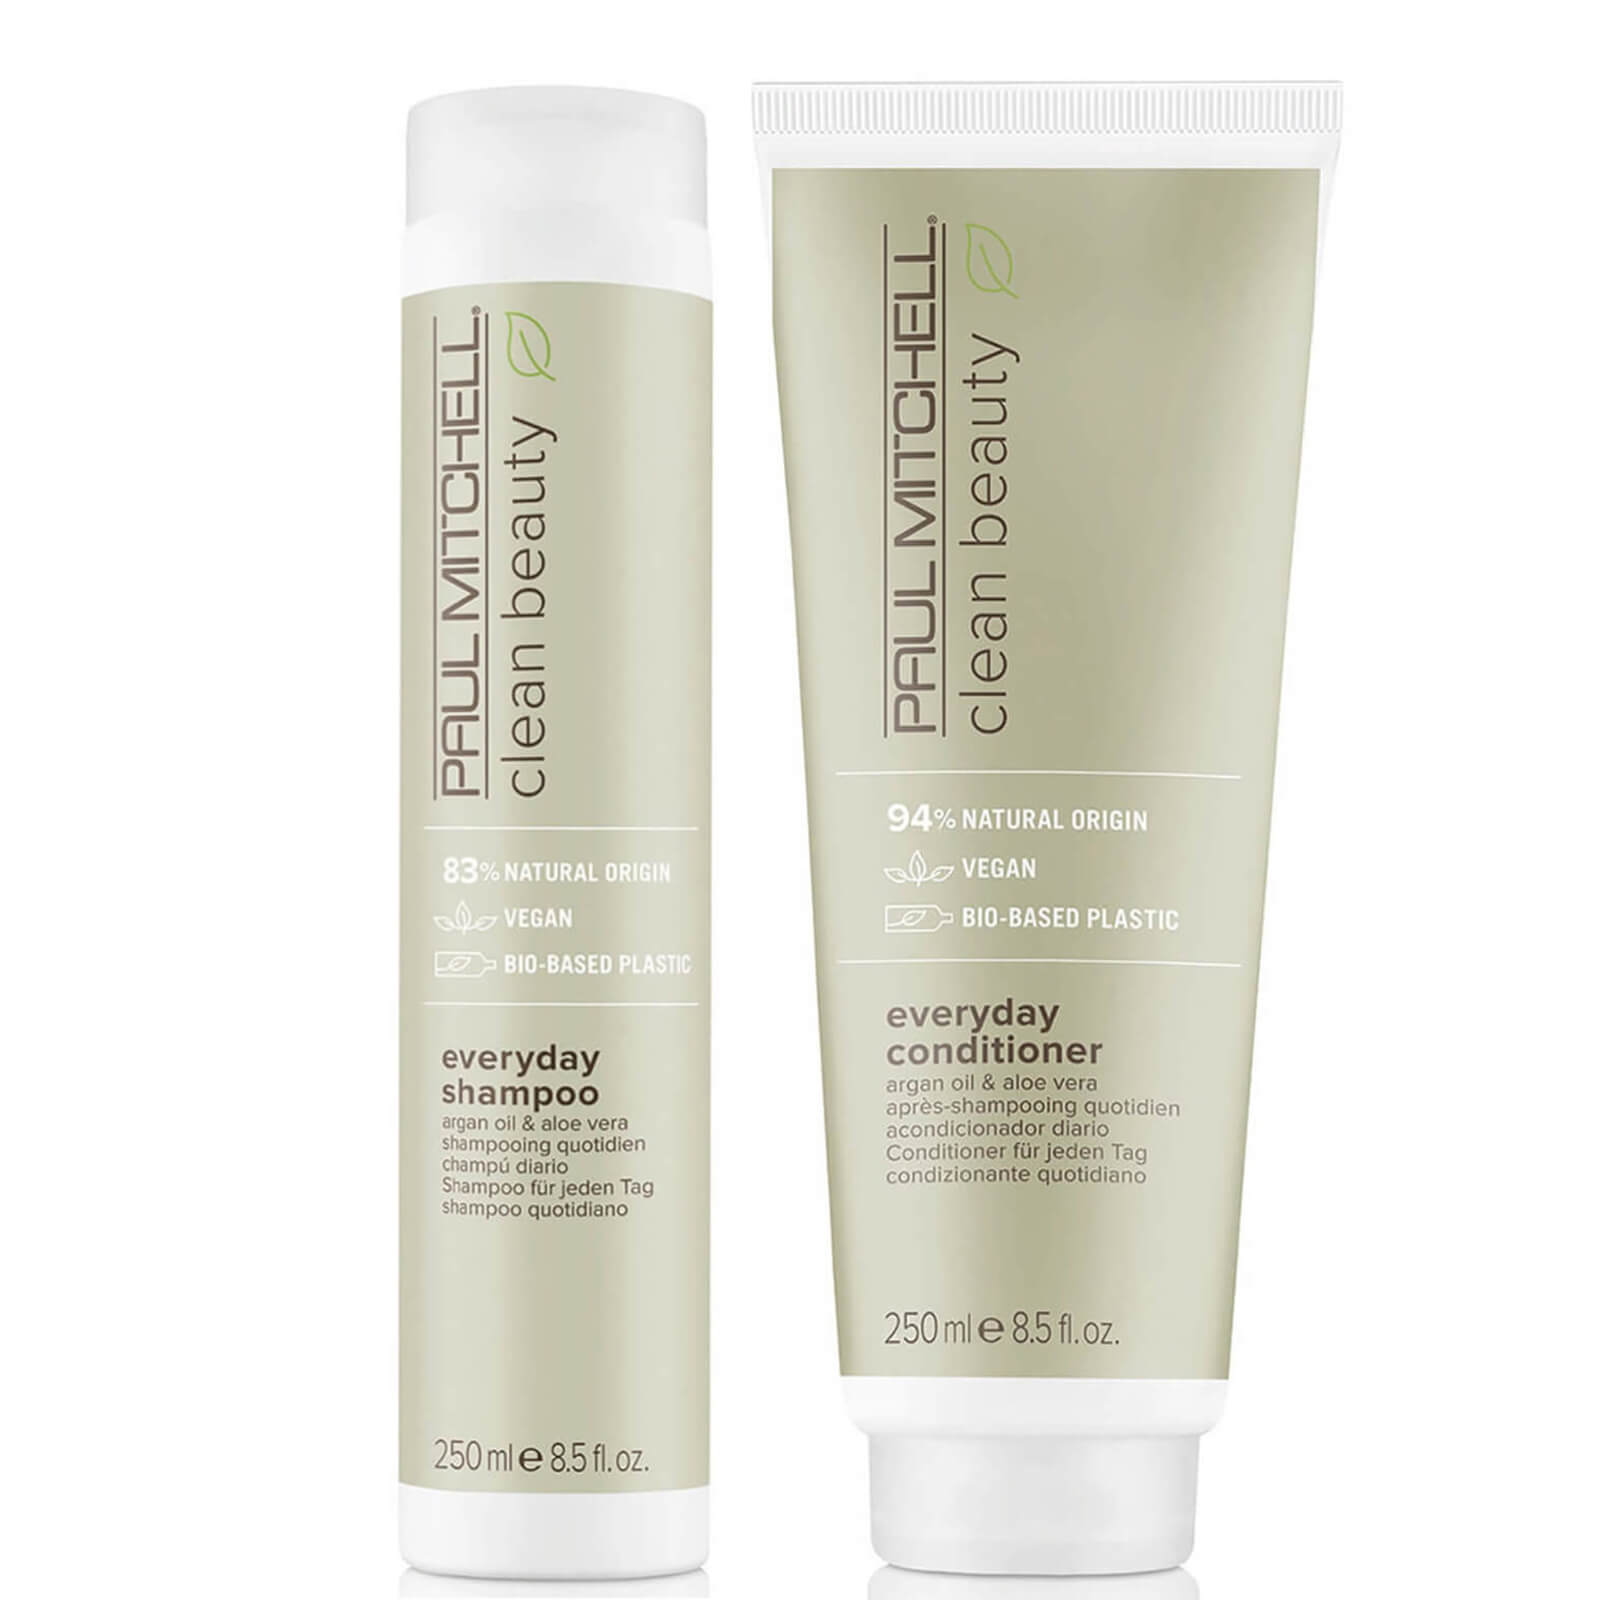 Paul Mitchell Clean Beauty Everyday Shampoo and Conditioner Set